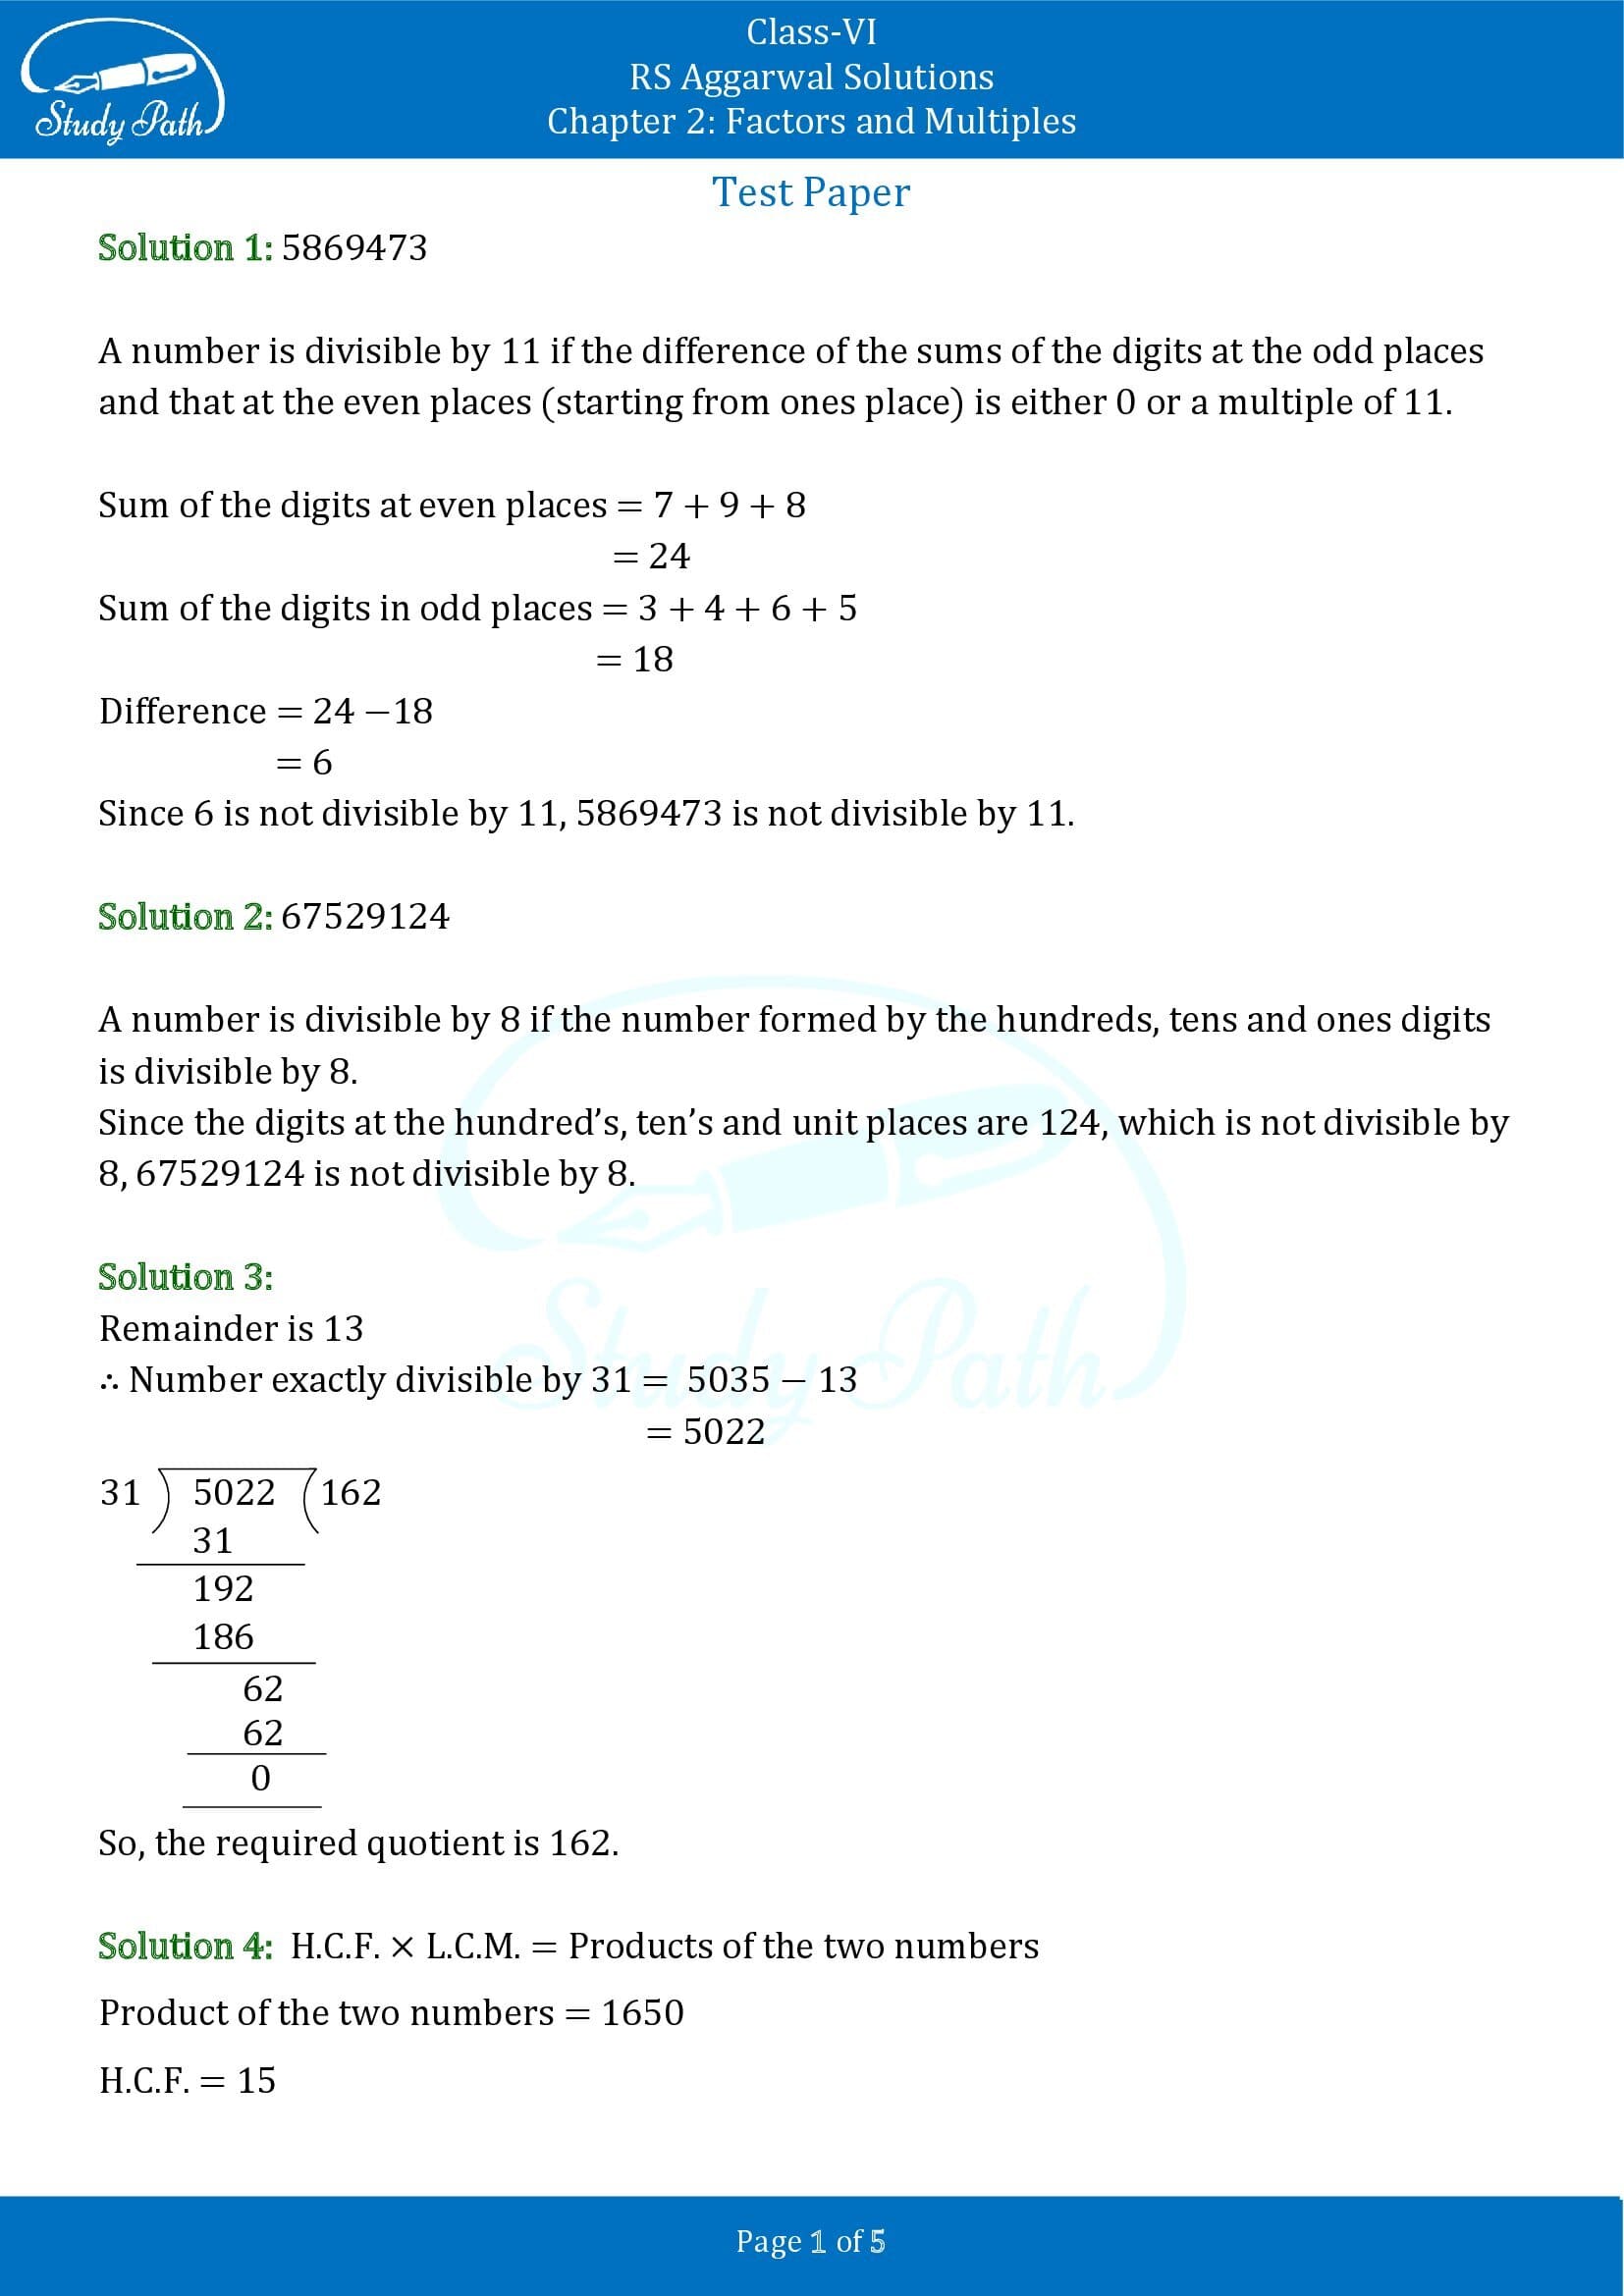 RS Aggarwal Solutions Class 6 Chapter 2 Factors and Multiples Test Paper 00001